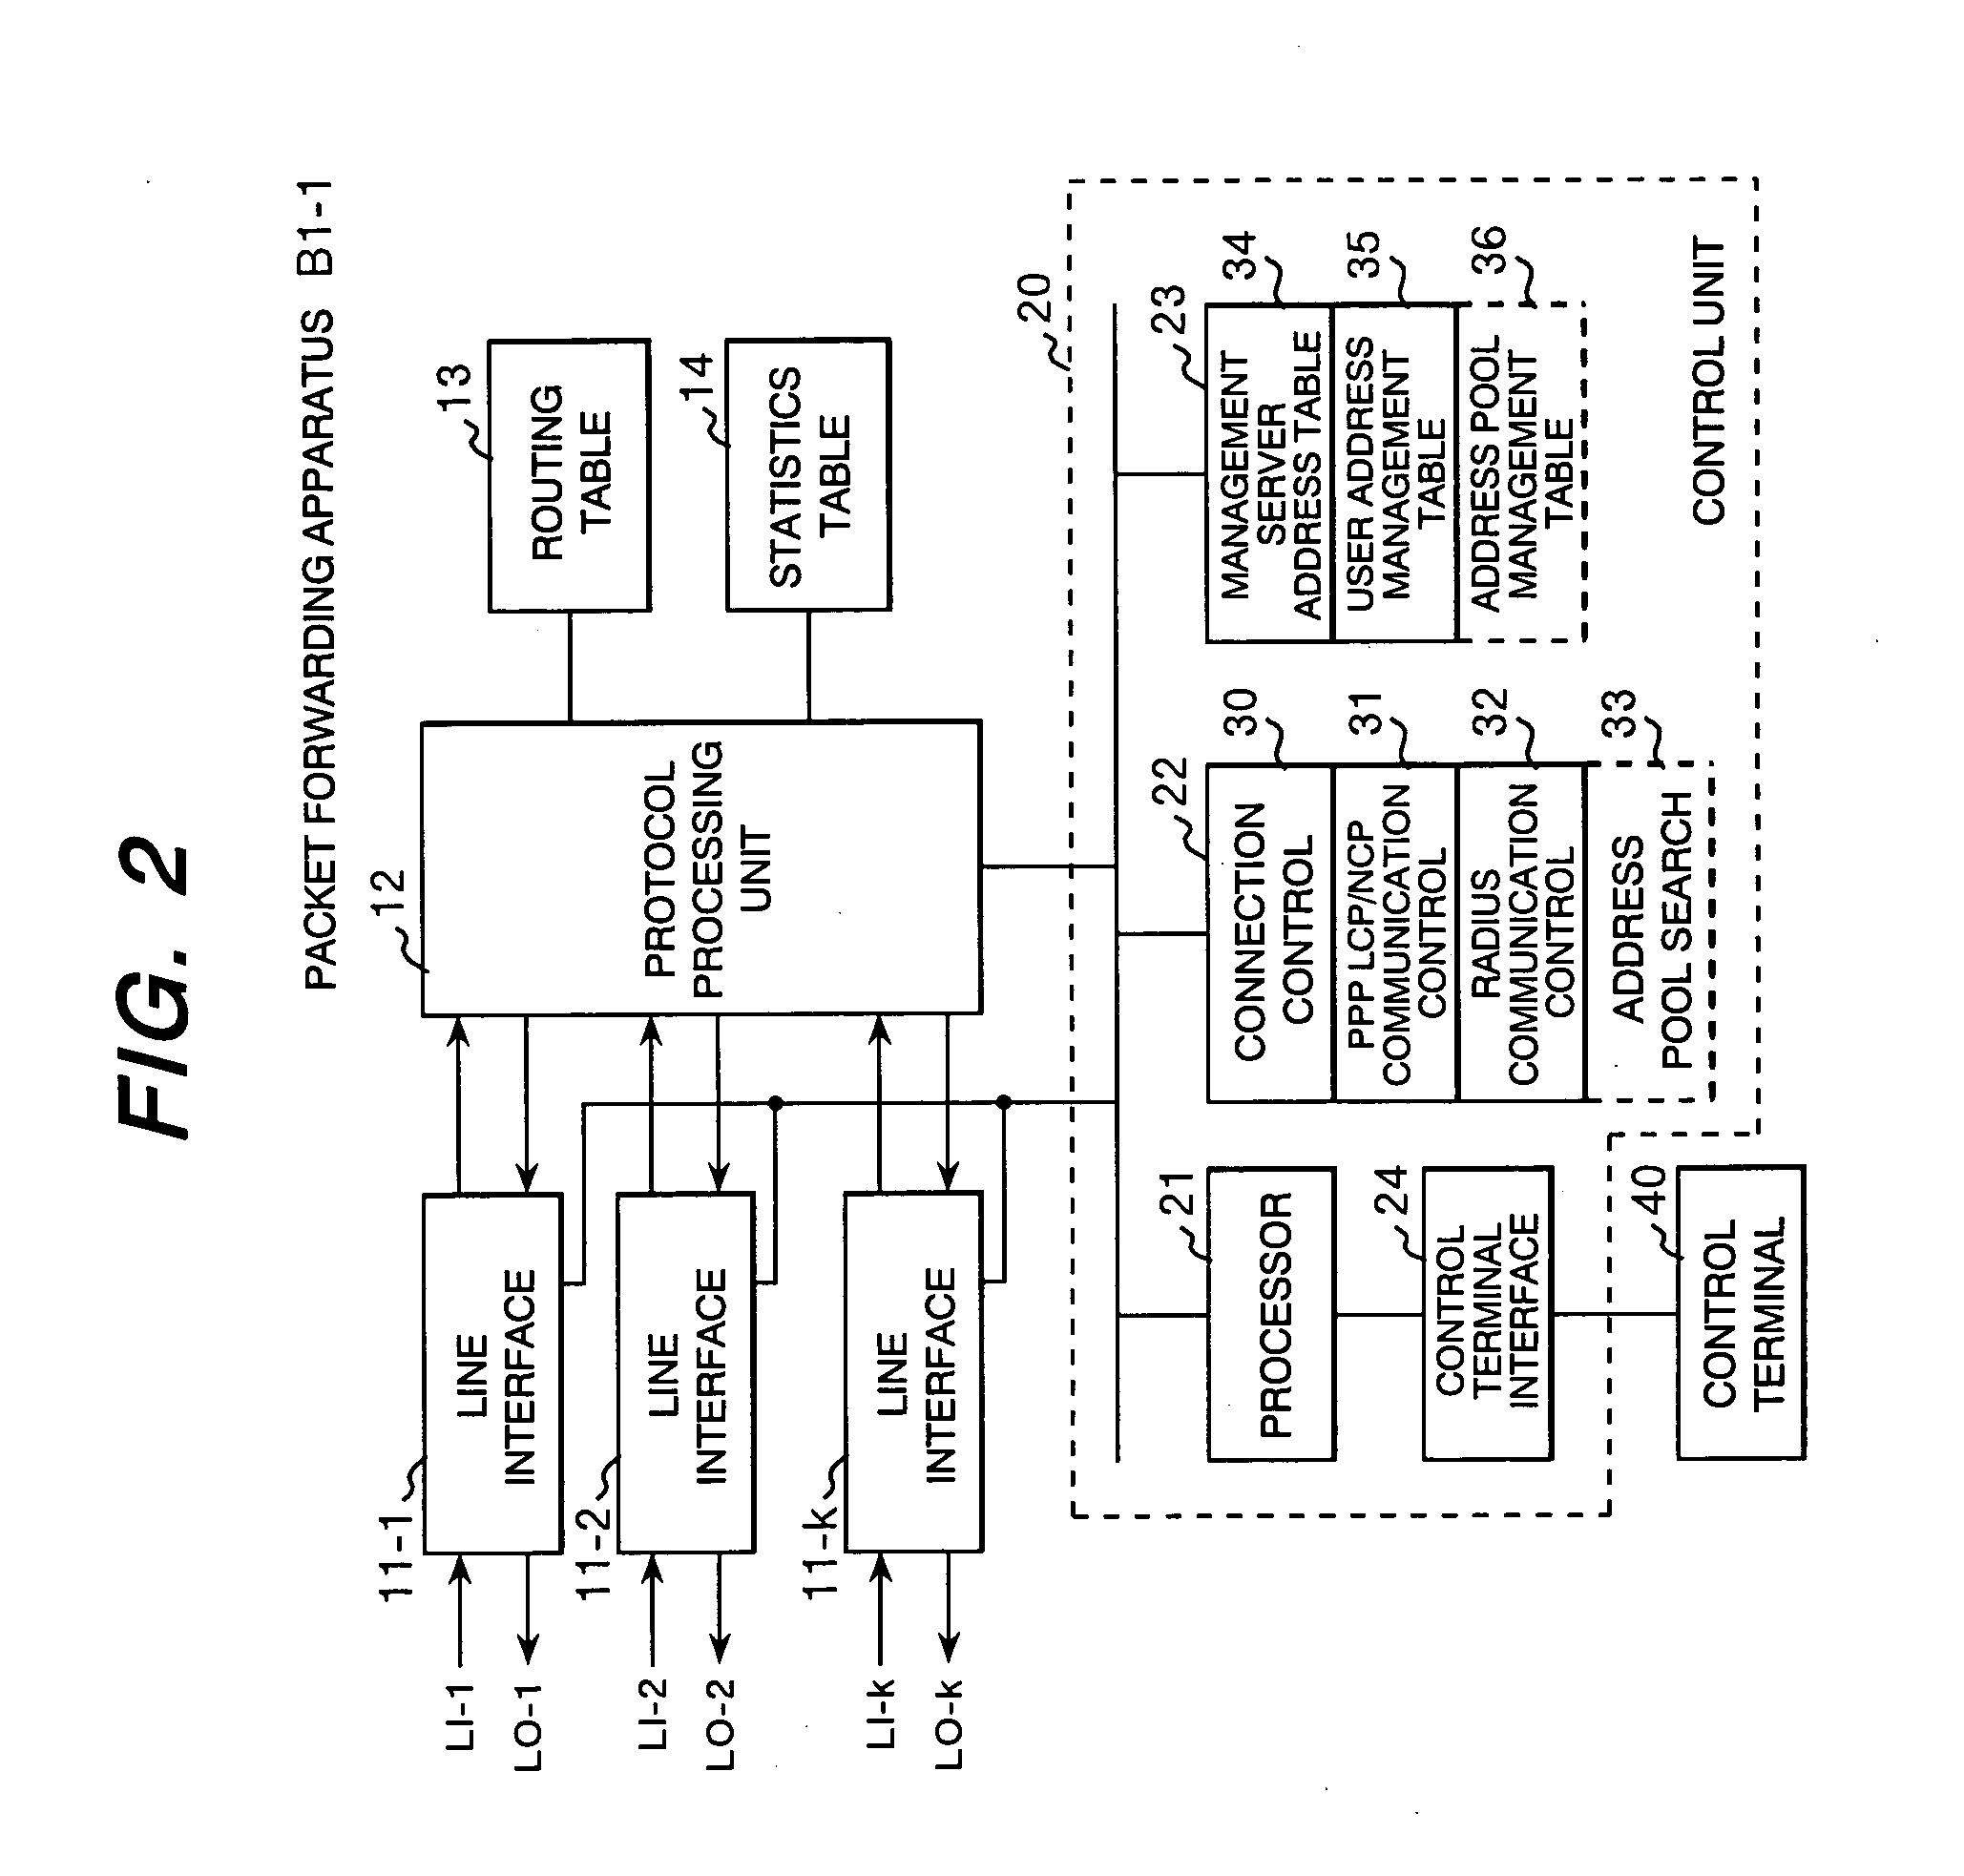 Packet forwarding apparatus and access network system